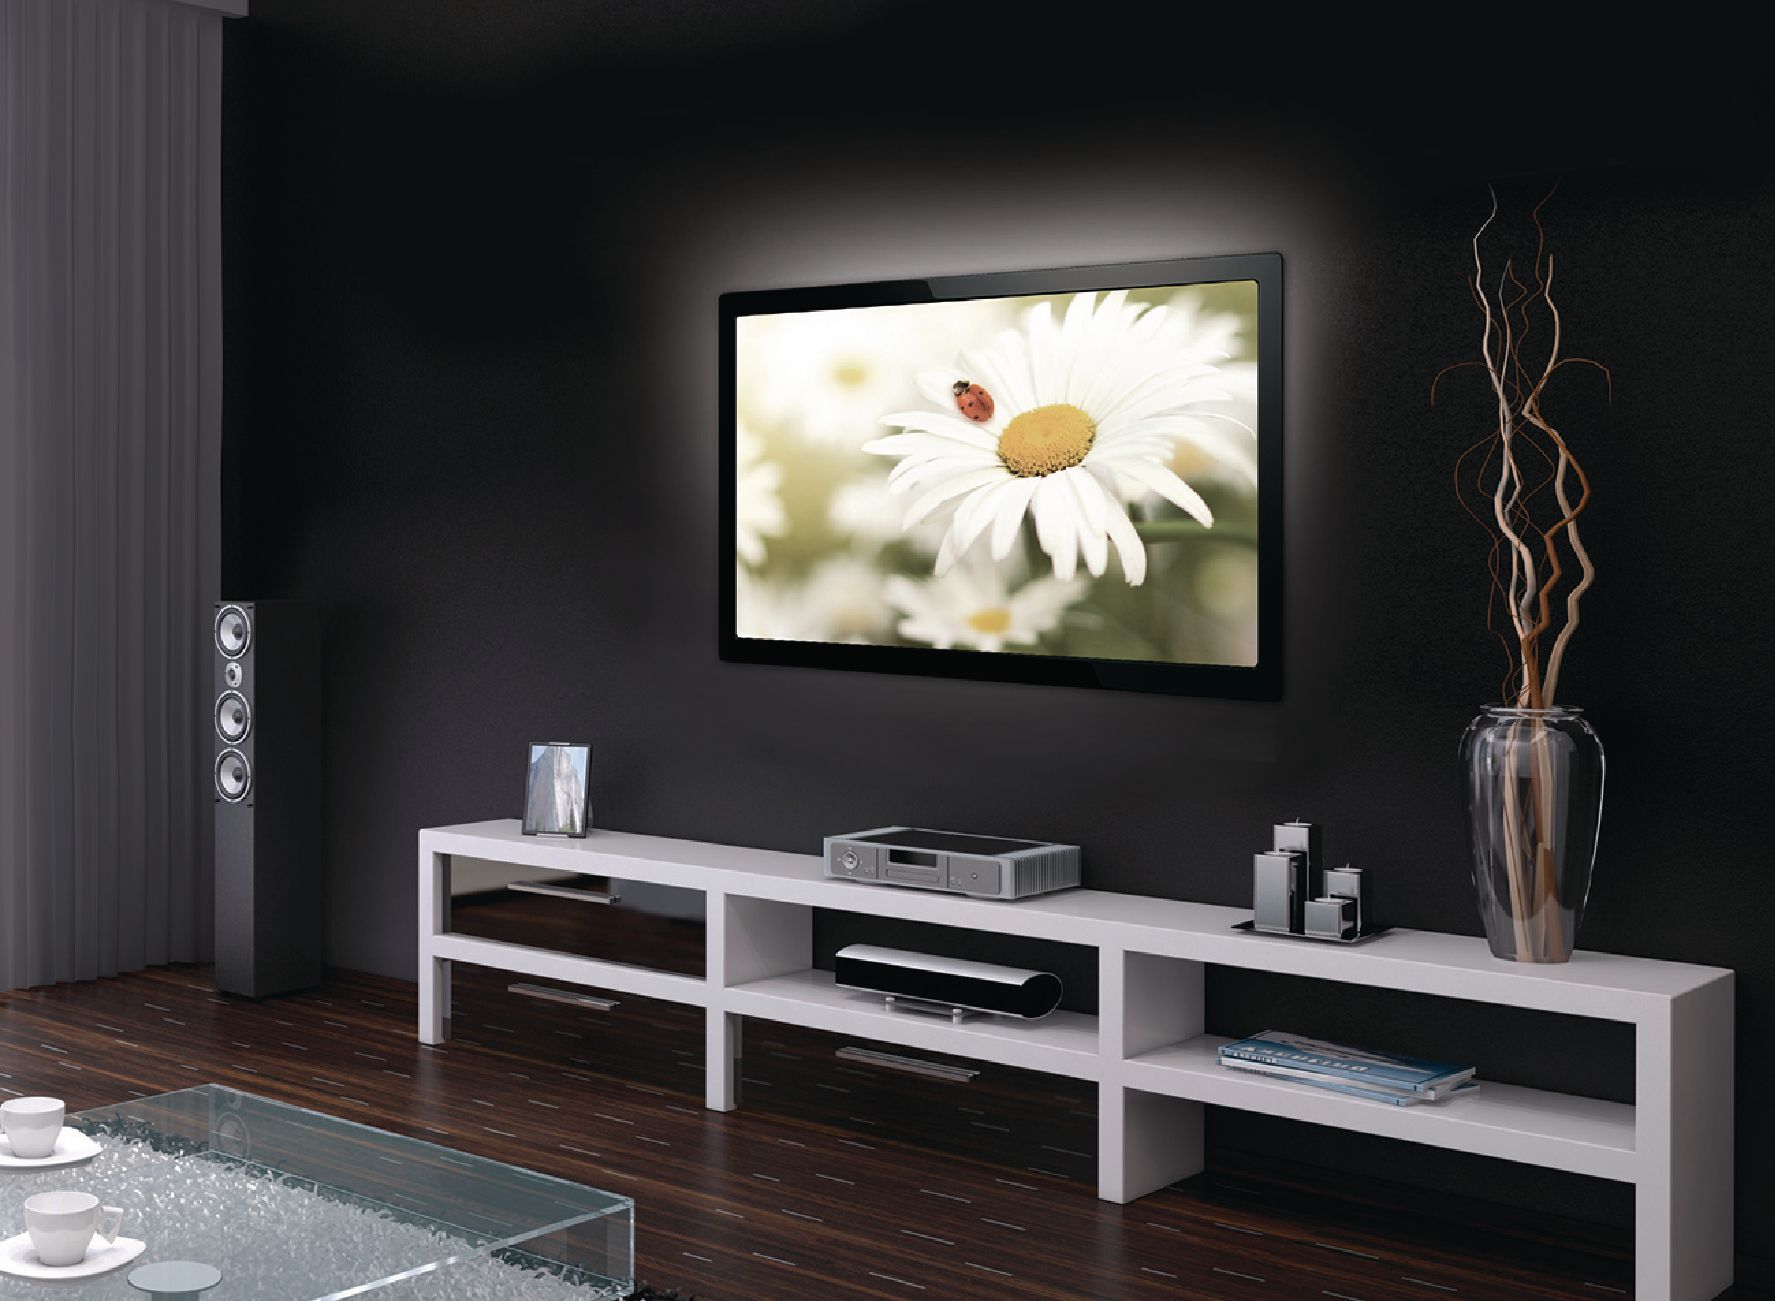 Buy This Today - TV Moodlight LED